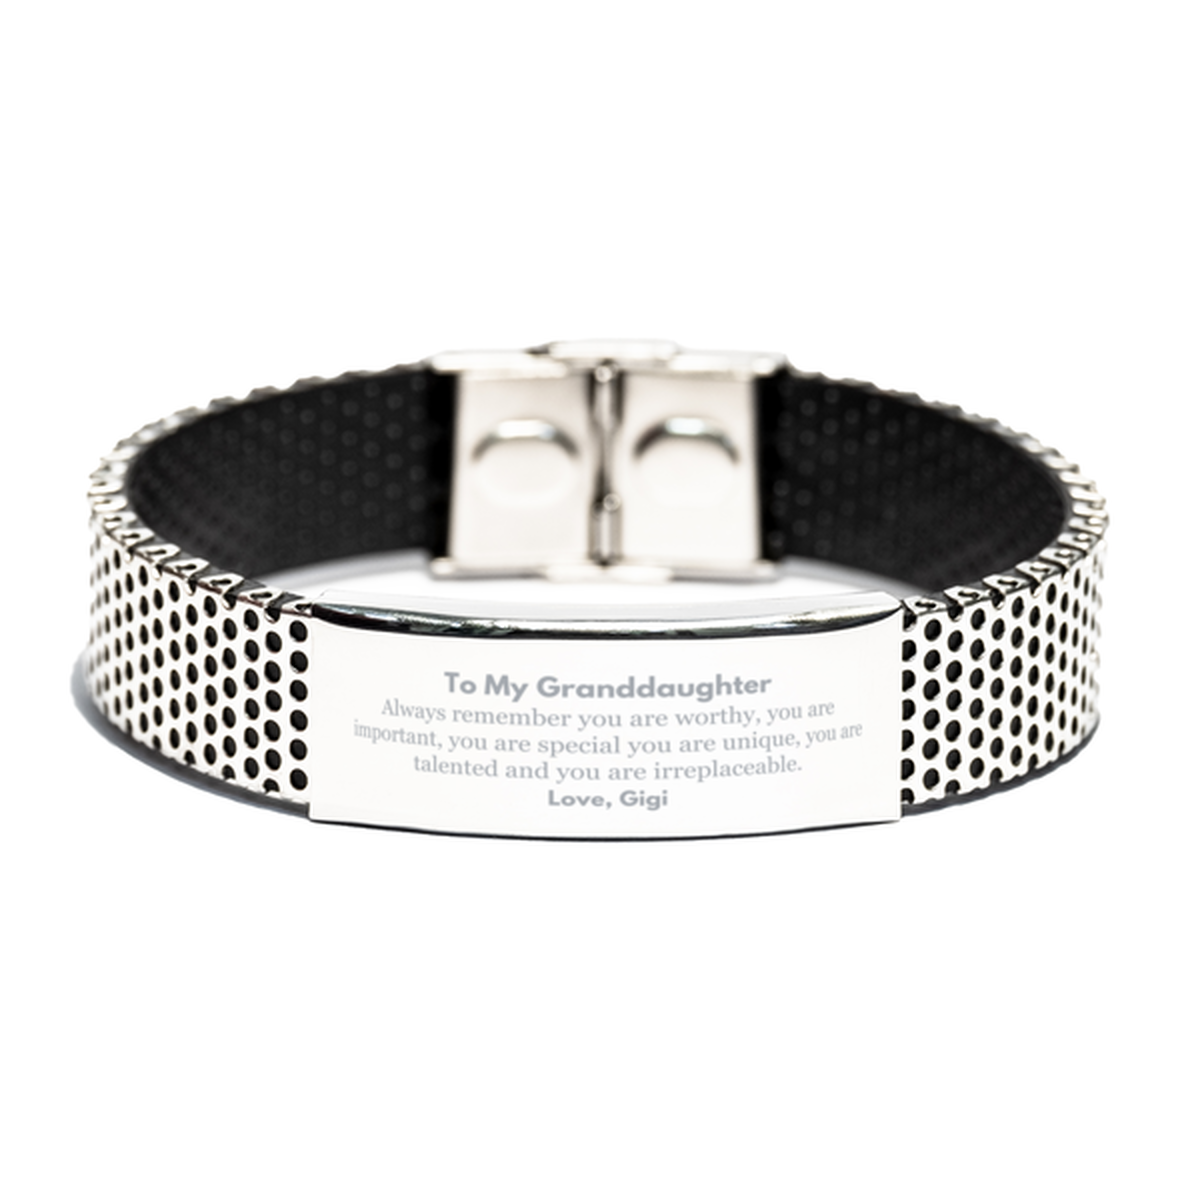 Granddaughter Birthday Gifts from Gigi, Inspirational Stainless Steel Bracelet for Granddaughter Christmas Graduation Gifts for Granddaughter Always remember you are worthy, you are important. Love, Gigi